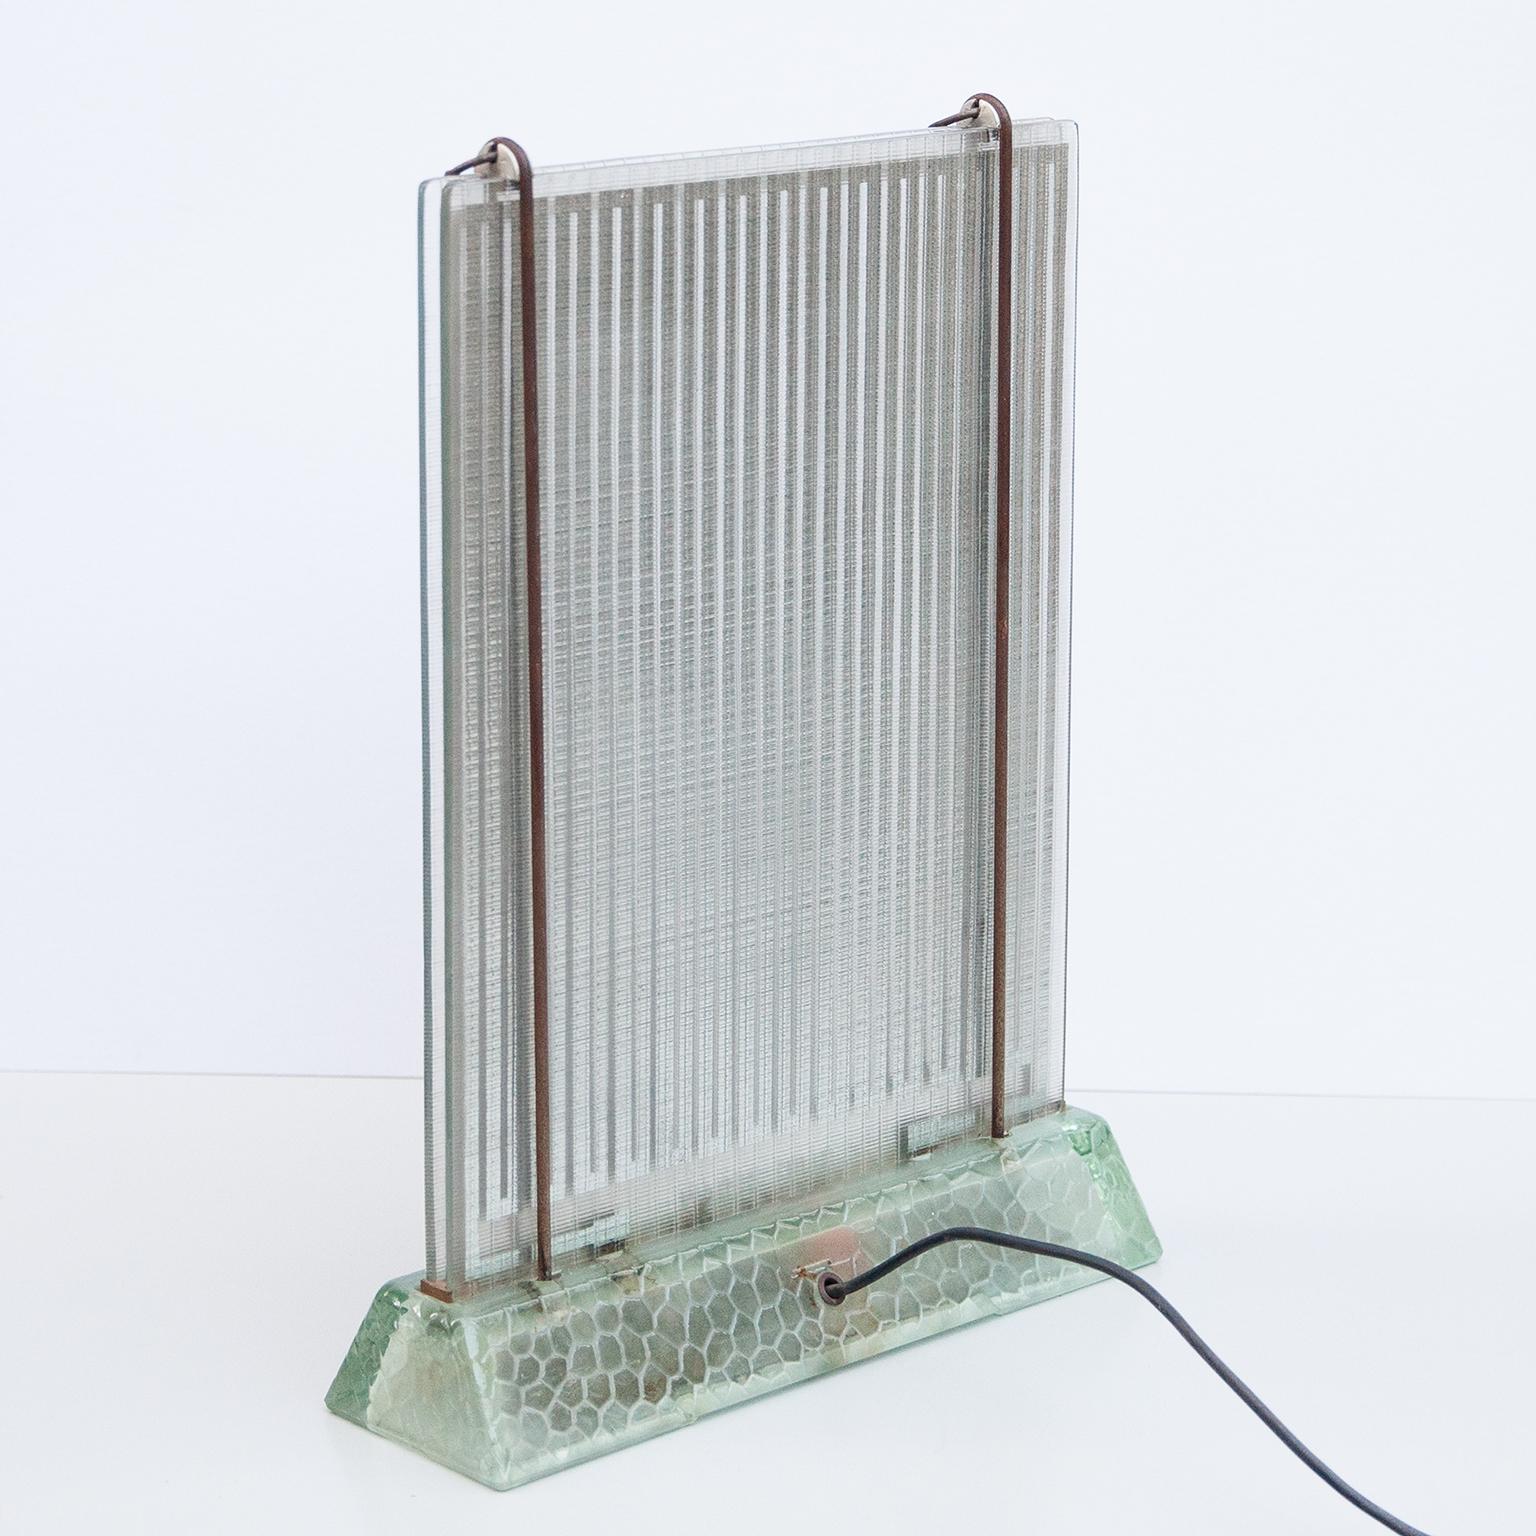 French Glass Radiator by Rene-Andre Coulon for Saint-Goban, France, 1937 For Sale